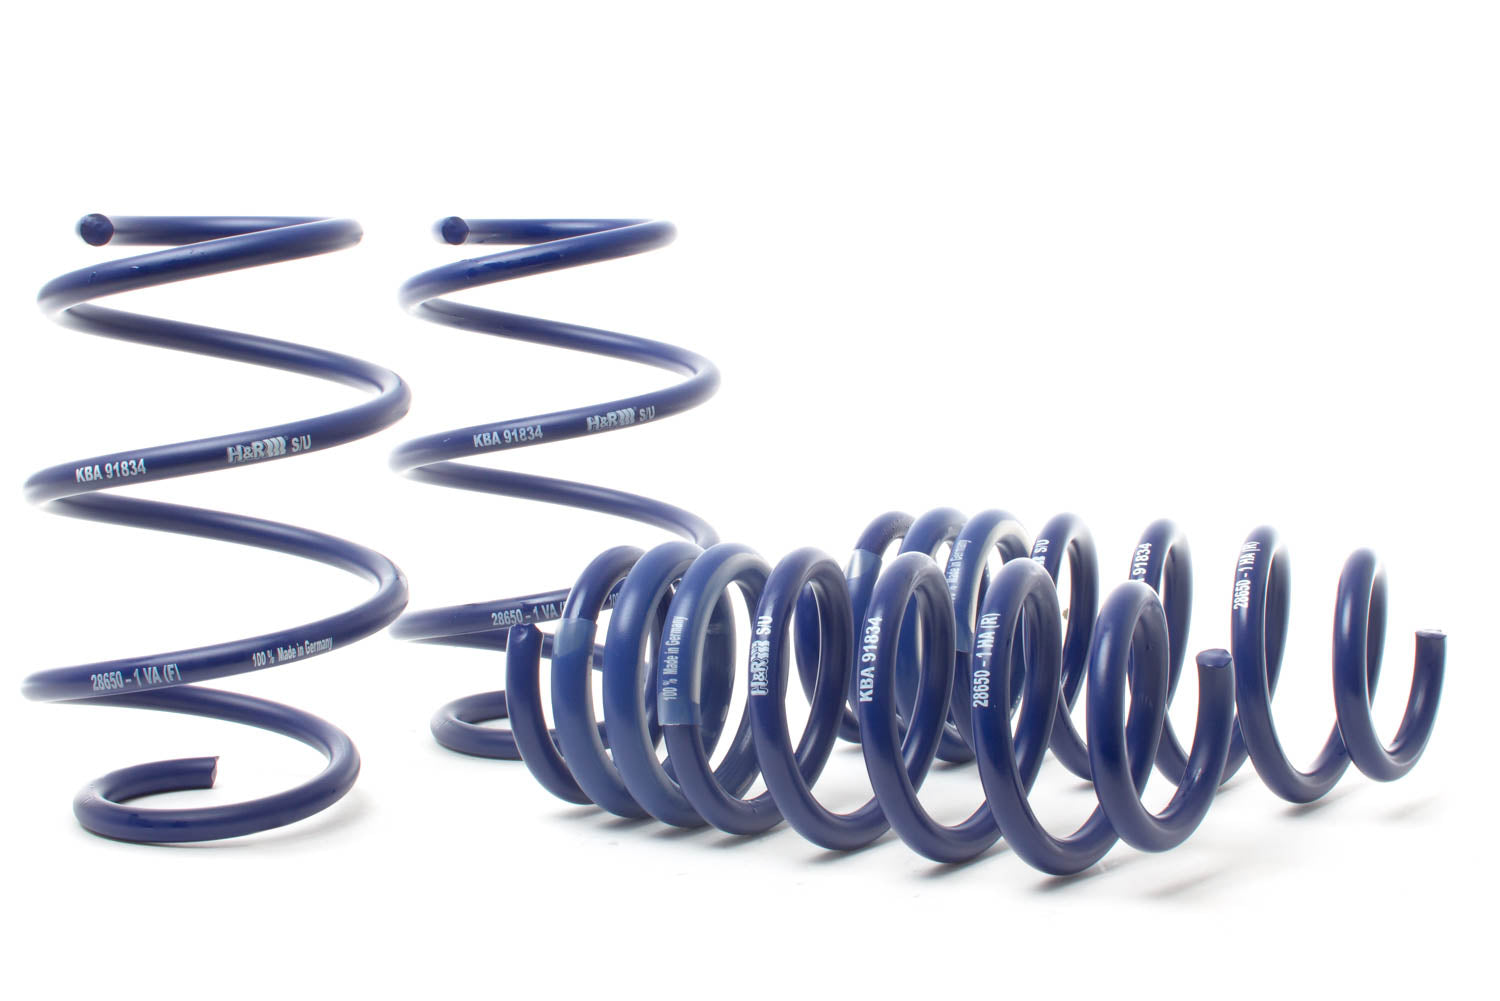 LOWERING SPRINGS FOR THE BMW IX1 XDRIVE30 (TYPE U11) - H & R